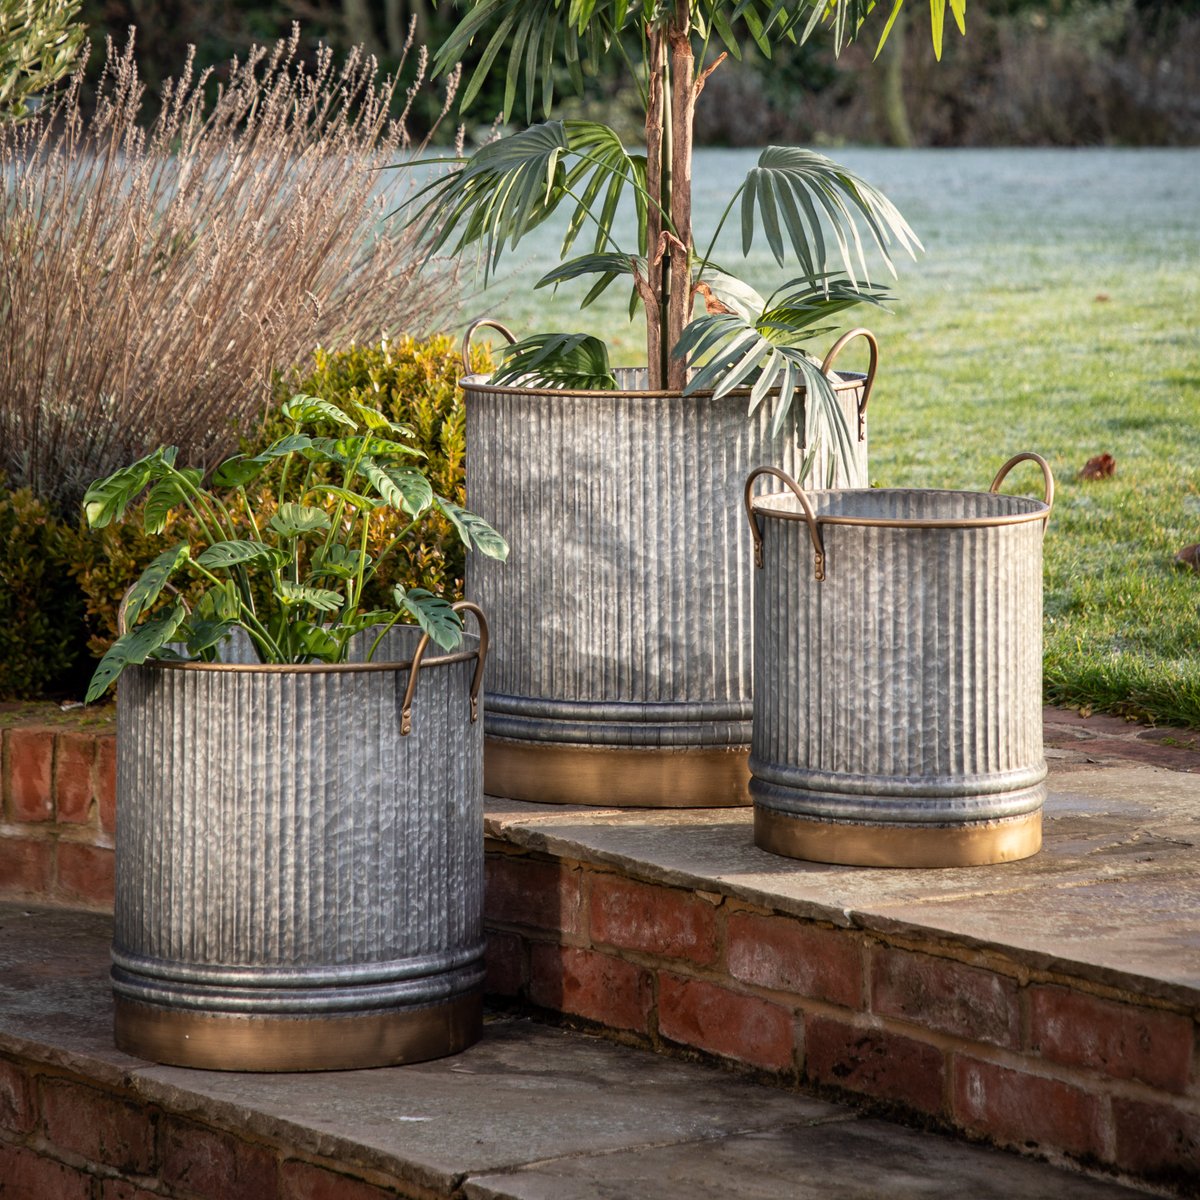 #Gardendécor for those who love alfresco life.
Discover our range of garden accessories perfect finishing touches to make outdoor spaces your favourite spot
Potting, ornaments, decoration, fire pits, chimineas & pizza ovens
alfrescogardenfurniture.co.uk
#gardenideas
#beautifulgardens